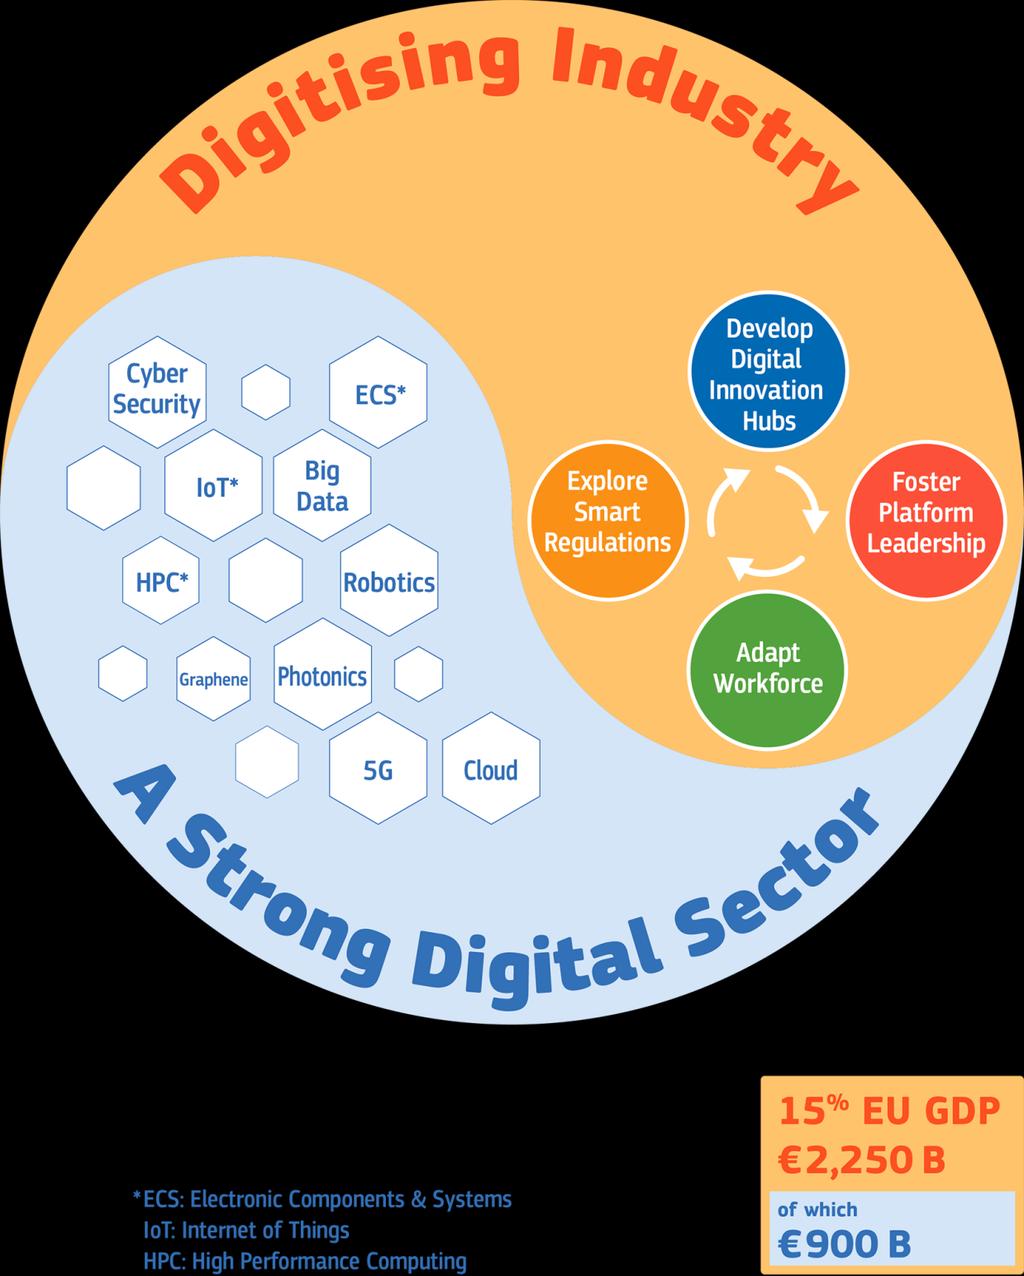 a strong digital sector in